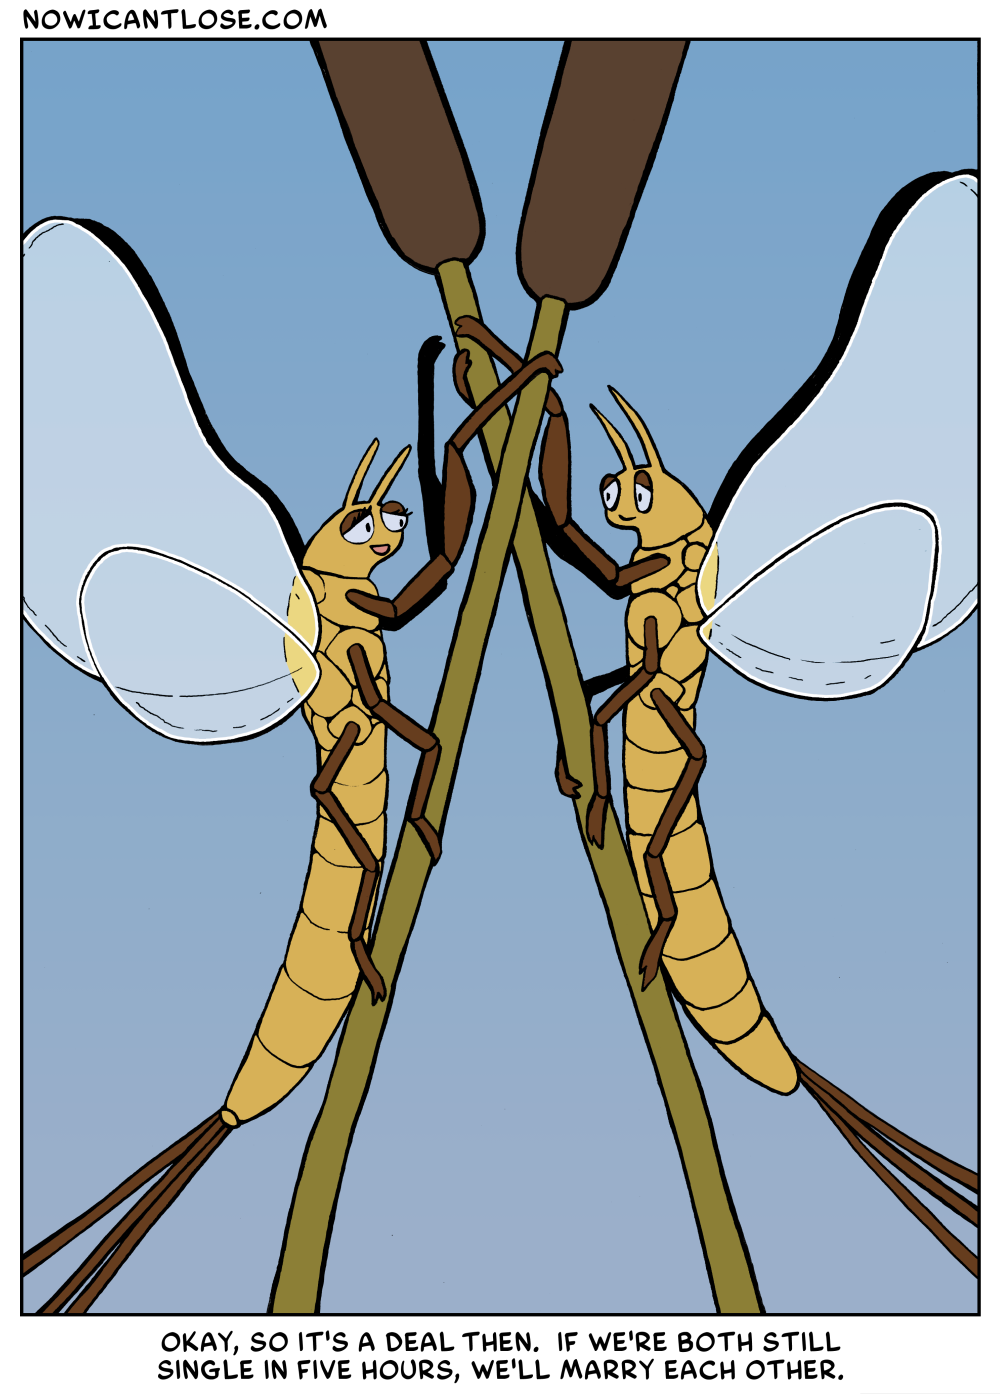 Did you know that some mayflies live for less than 5 minutes as adults? The ones in this comic last for about 16 hours, probably.